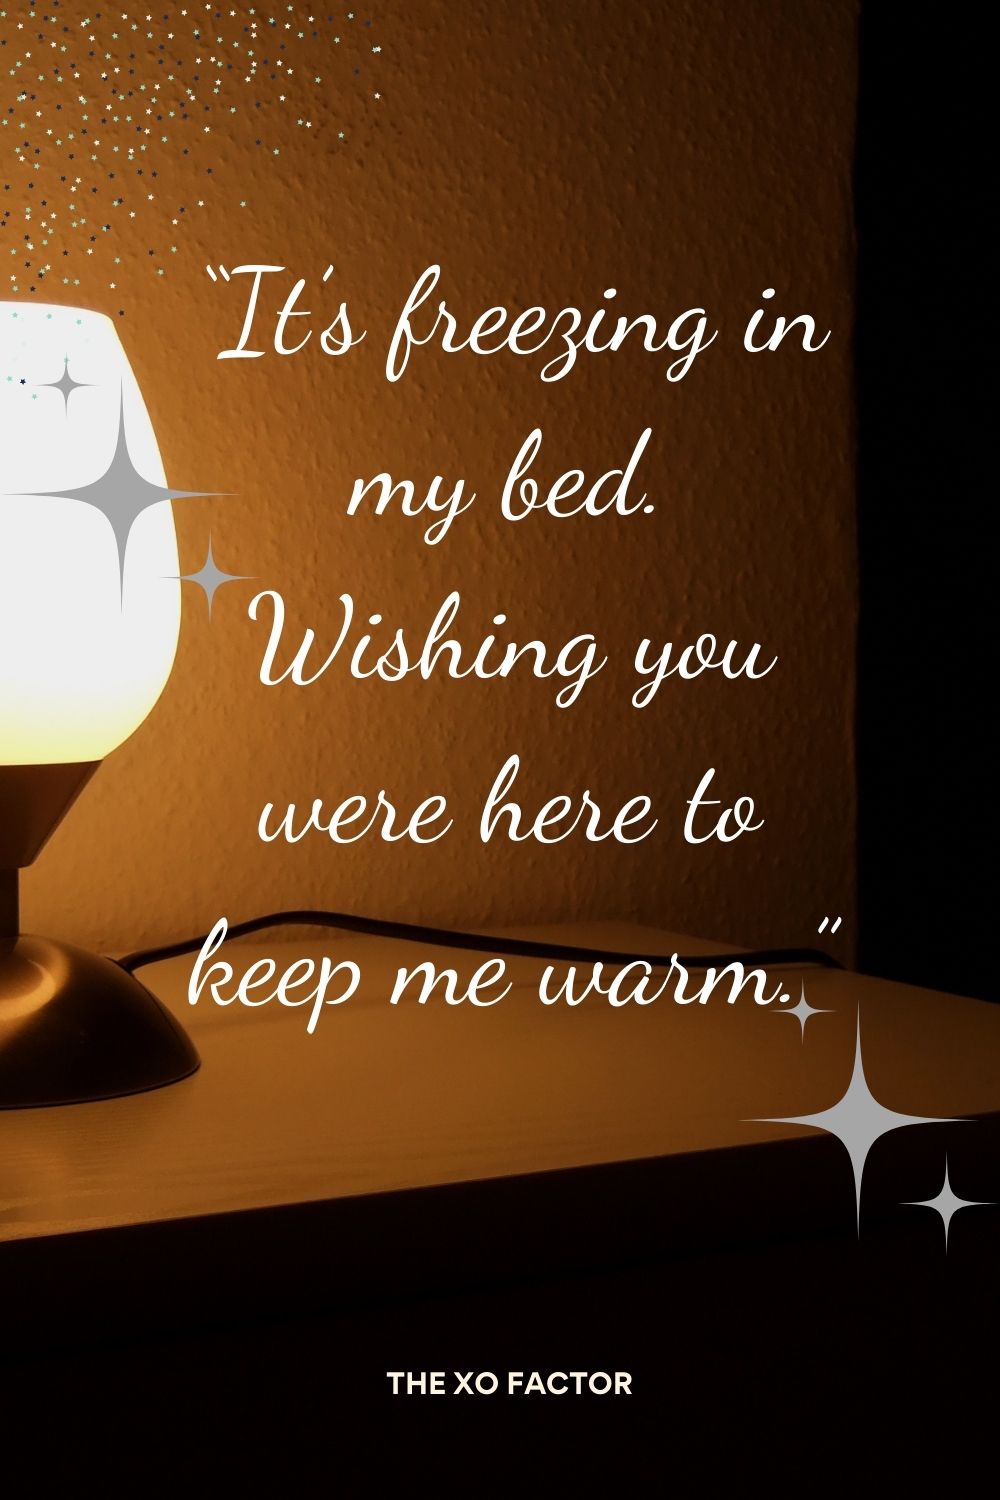 “It’s freezing in my bed. Wishing you were here to keep me warm.”